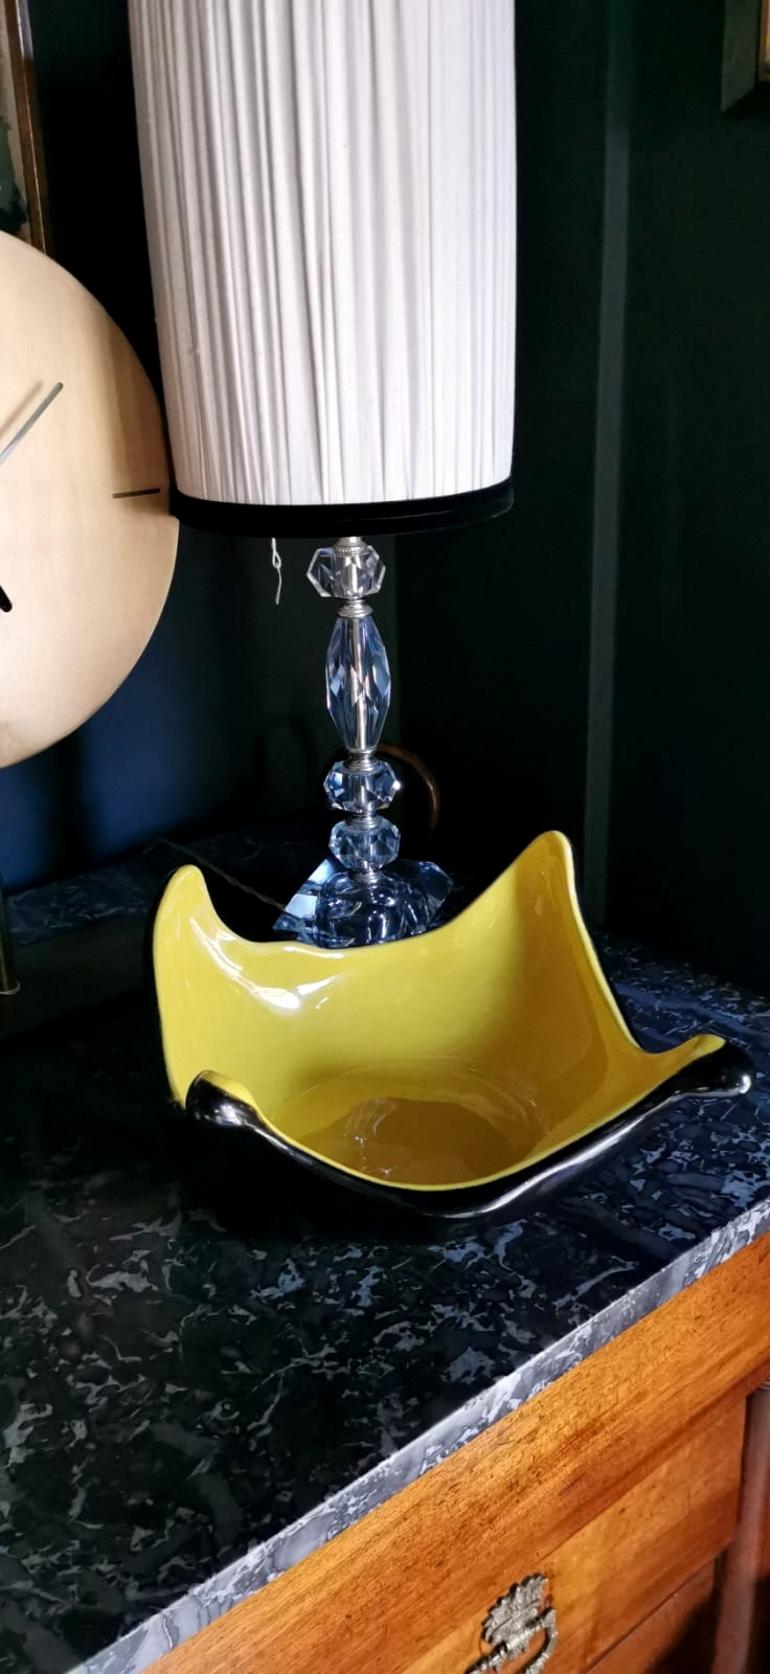 Mid-20th Century Rockabilly Style Bowl Yellow and Black Ceramic, 1952